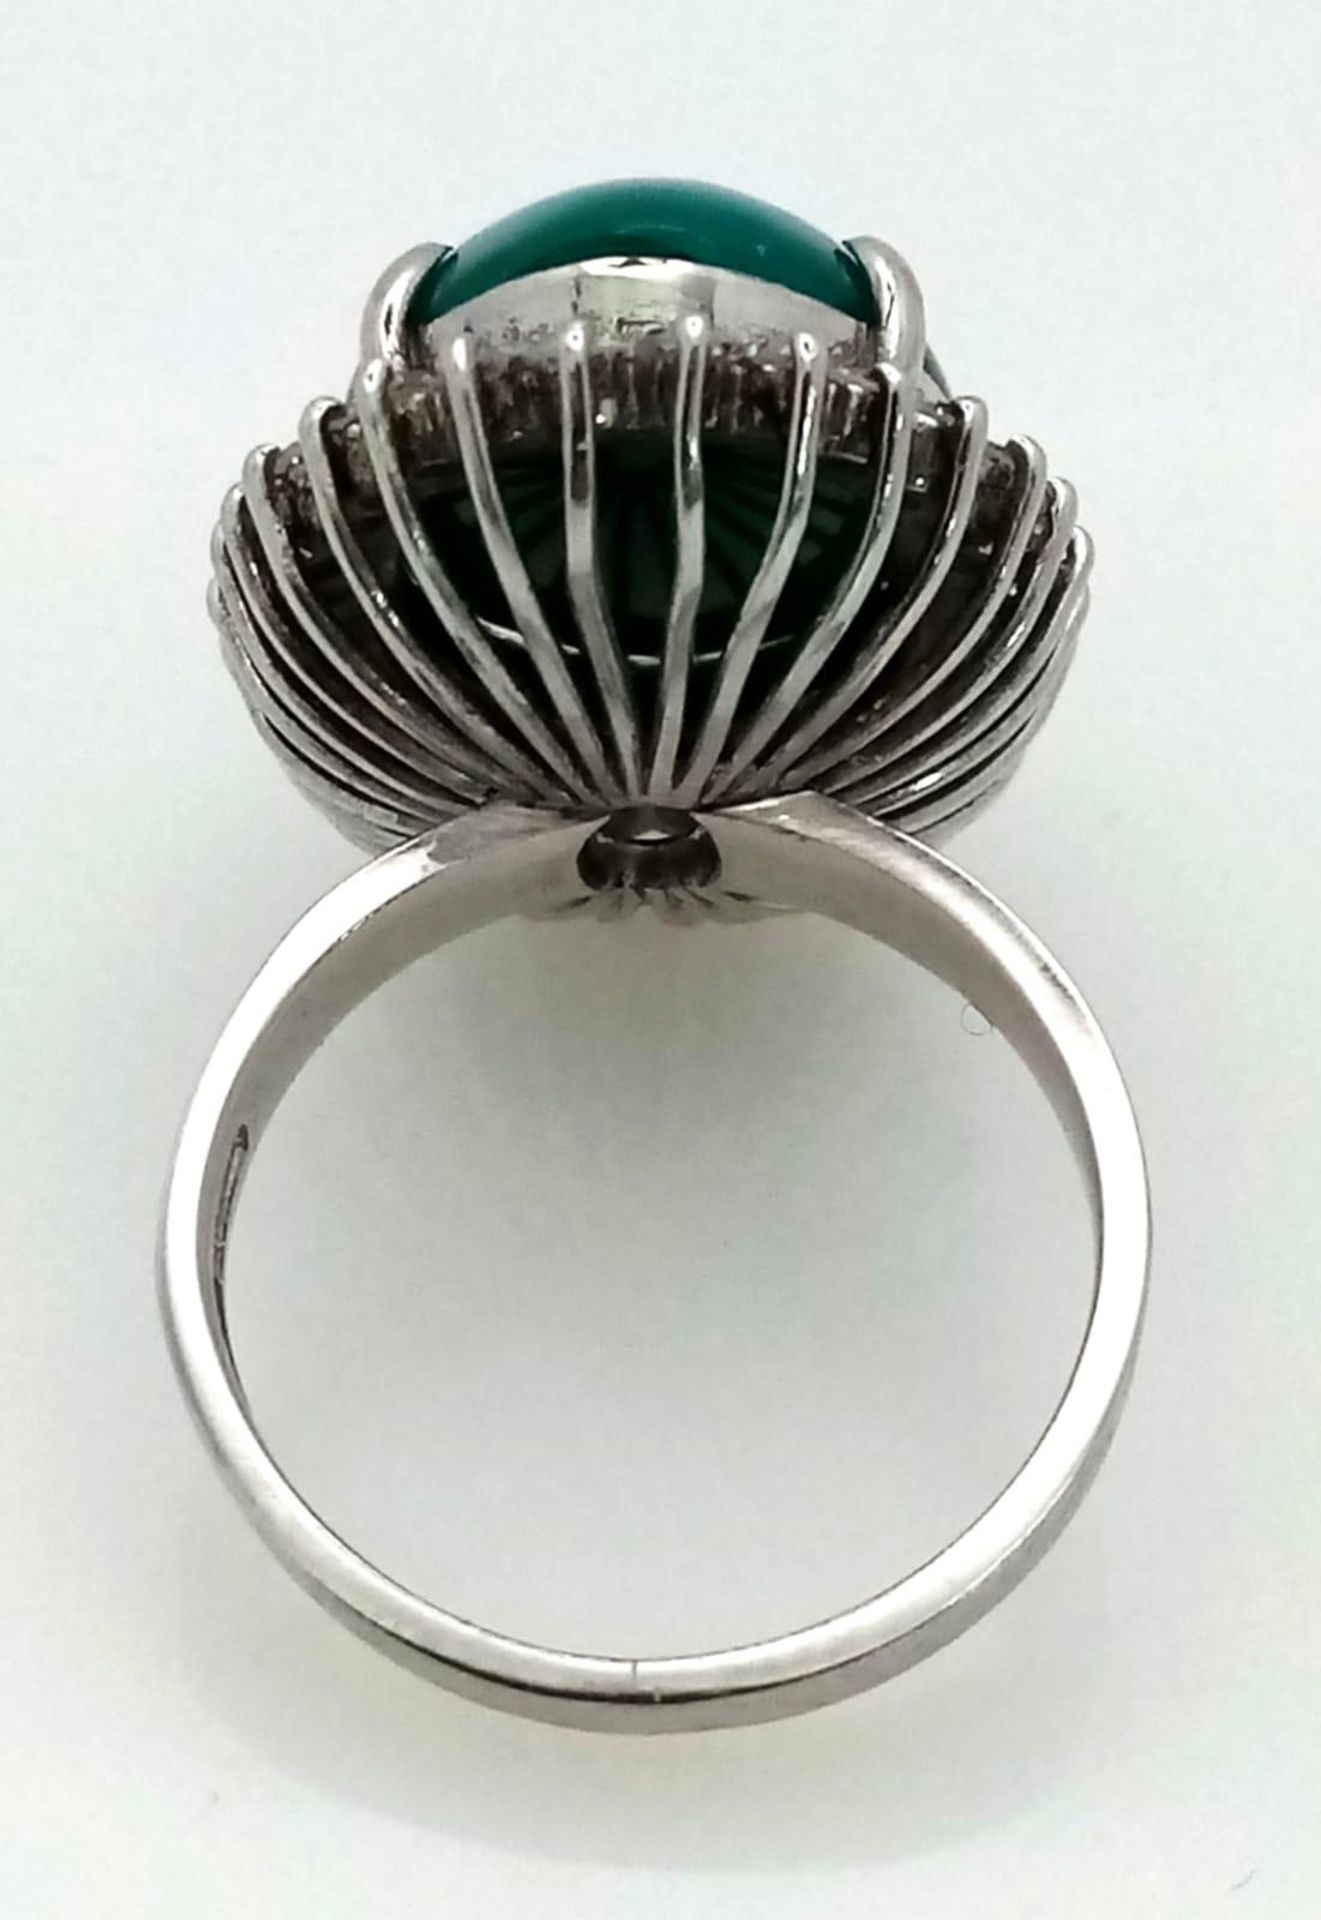 A 18K WHITE GOLD GREEN JADE CENTRE STONE SURROUNDED BY DIAMONDS RING . 0.66CT CABOCHON DIAMOND TOTAL - Image 3 of 9